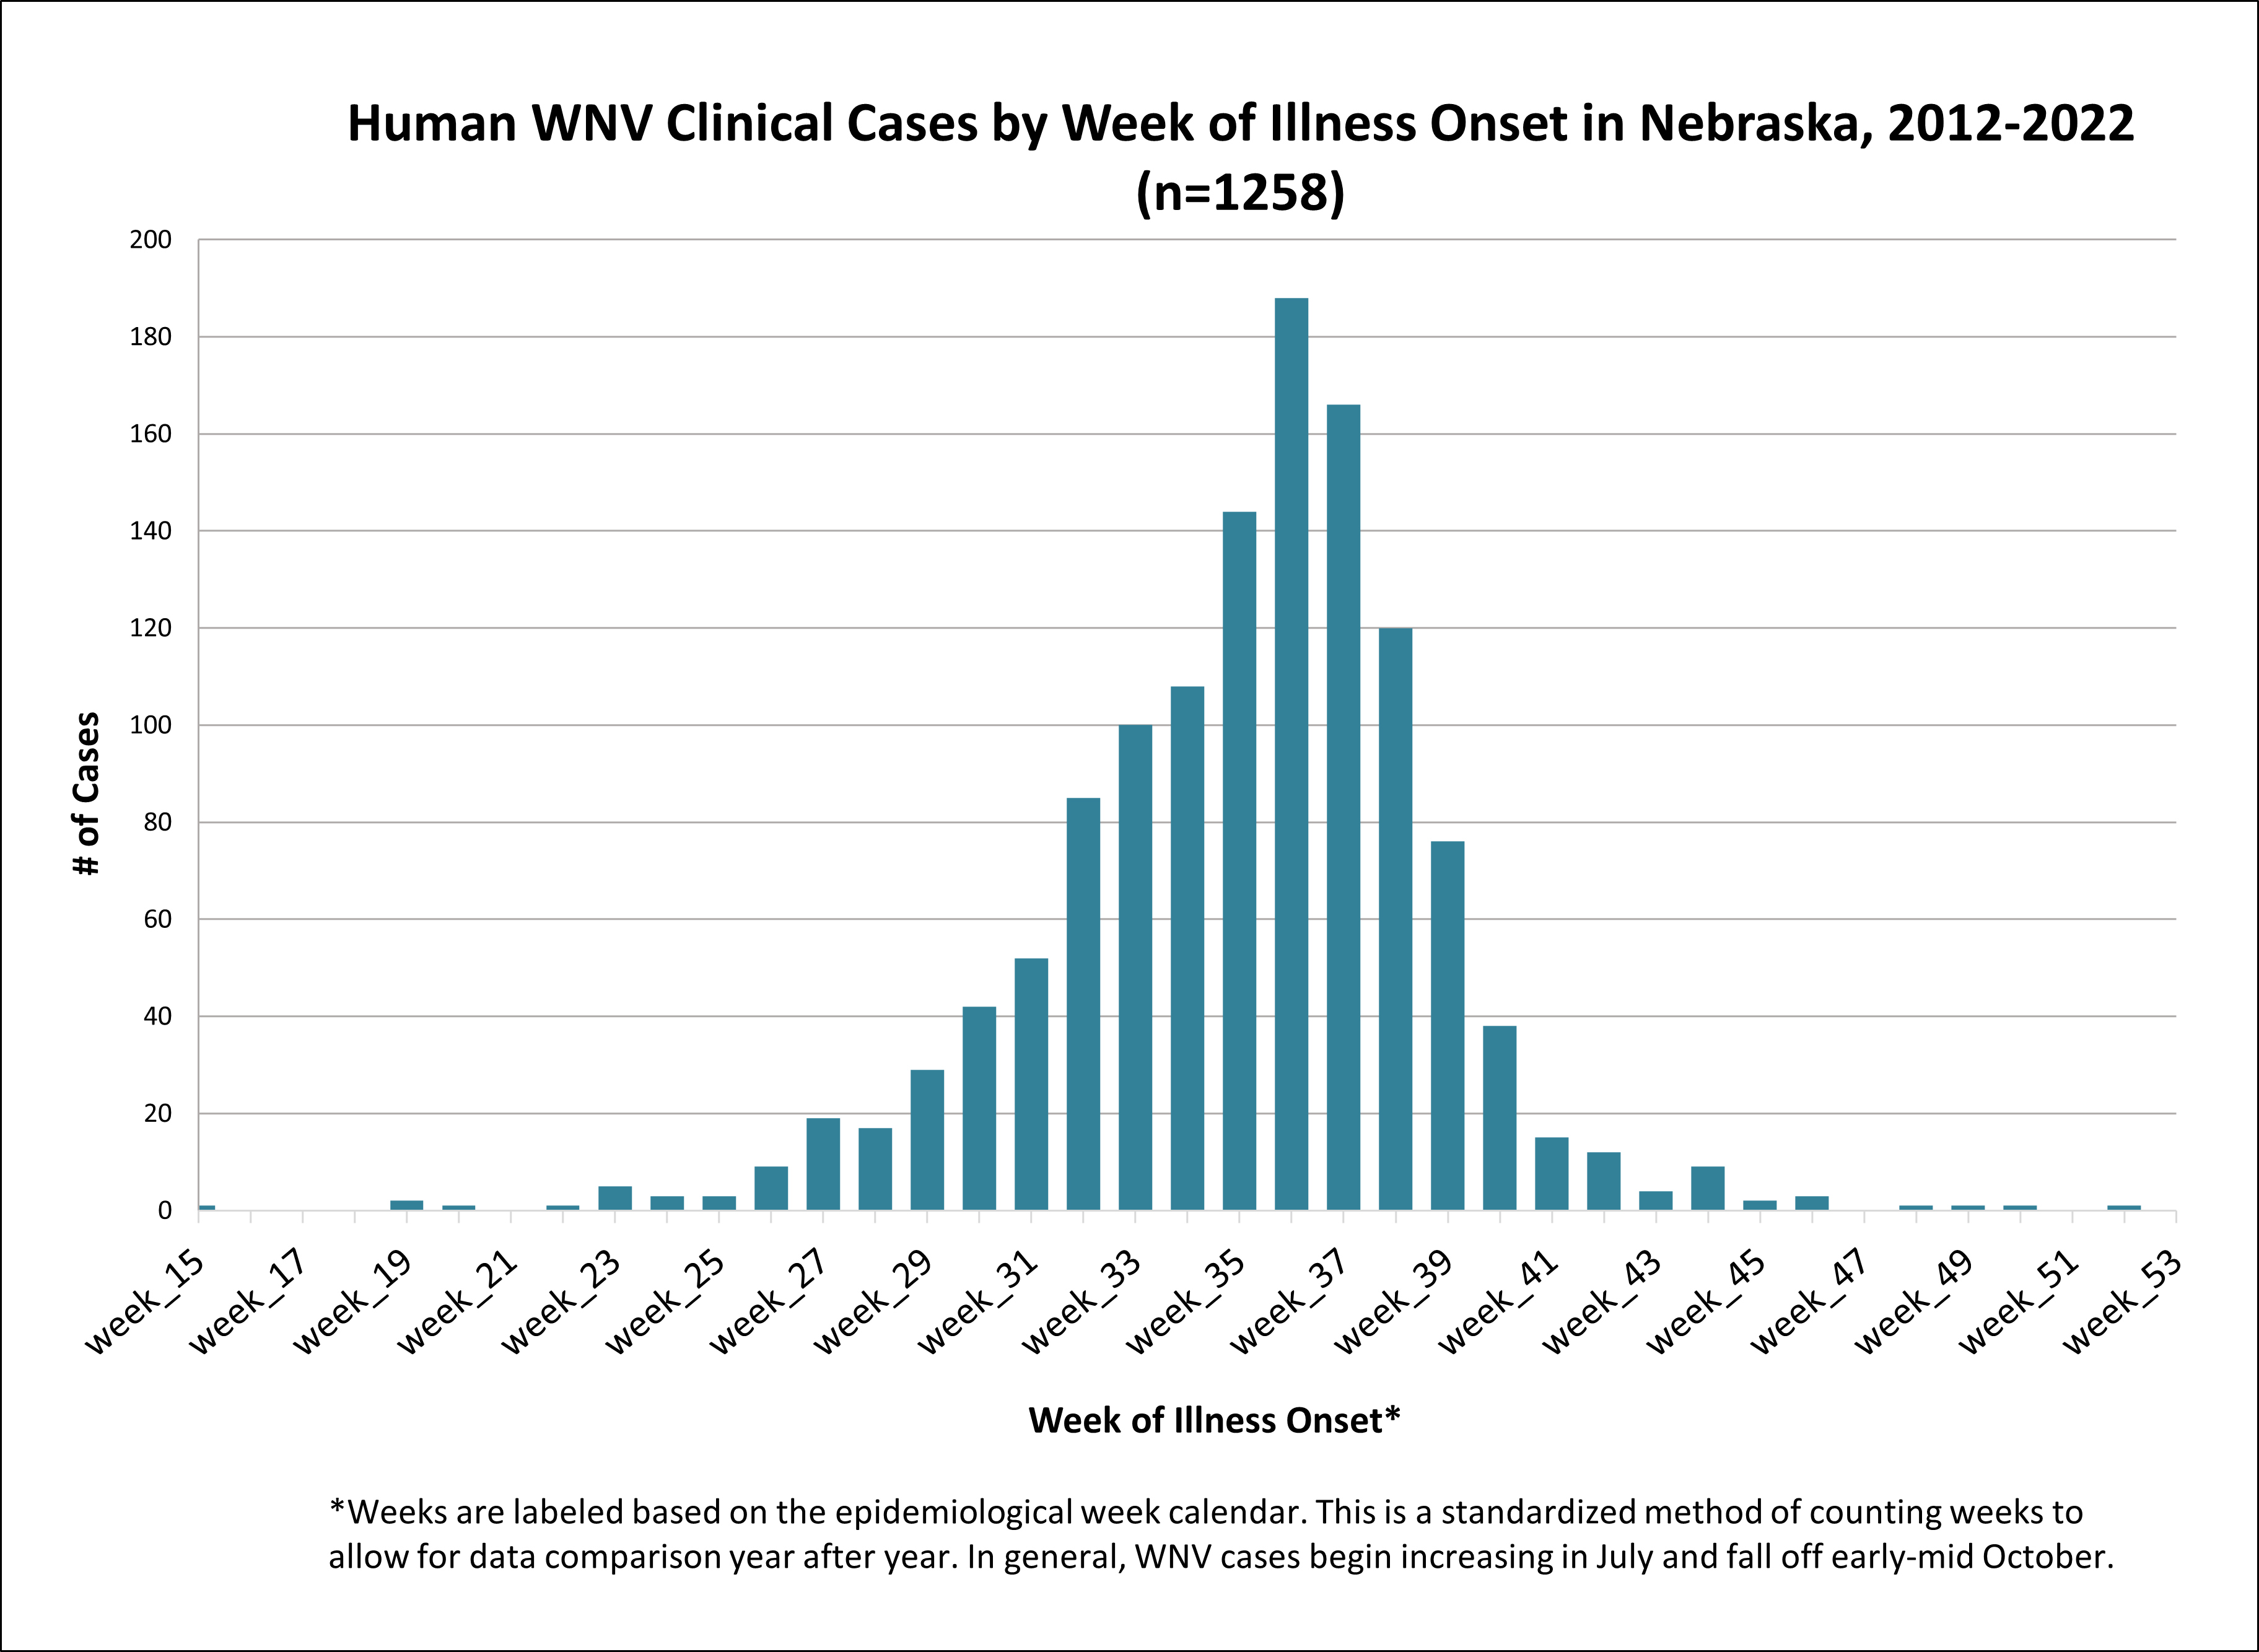 Human WNV Clinical Cases 2012-2022